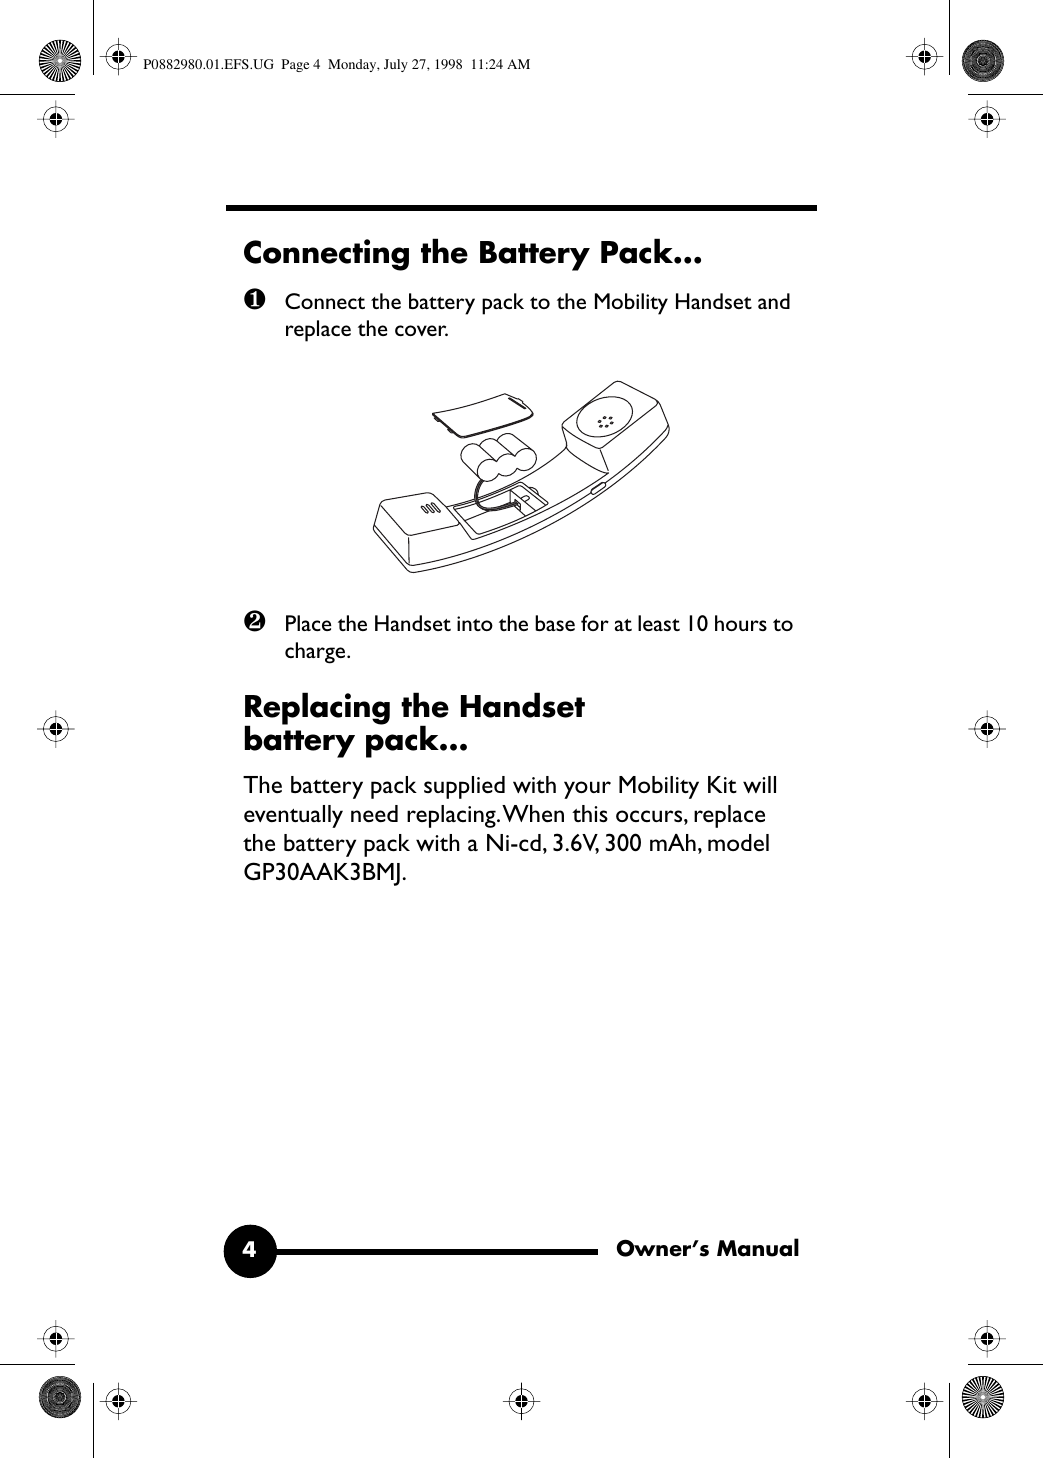  Owner’s Manual4 Connecting the Battery Pack... ❶ Connect the battery pack to the Mobility Handset and replace the cover. ❷ Place the Handset into the base for at least 10 hours to charge. Replacing the Handset battery pack... The battery pack supplied with your Mobility Kit will eventually need replacing. When this occurs, replace the battery pack with a Ni-cd, 3.6V, 300 mAh, model GP30AAK3BMJ. P0882980.01.EFS.UG  Page 4  Monday, July 27, 1998  11:24 AM